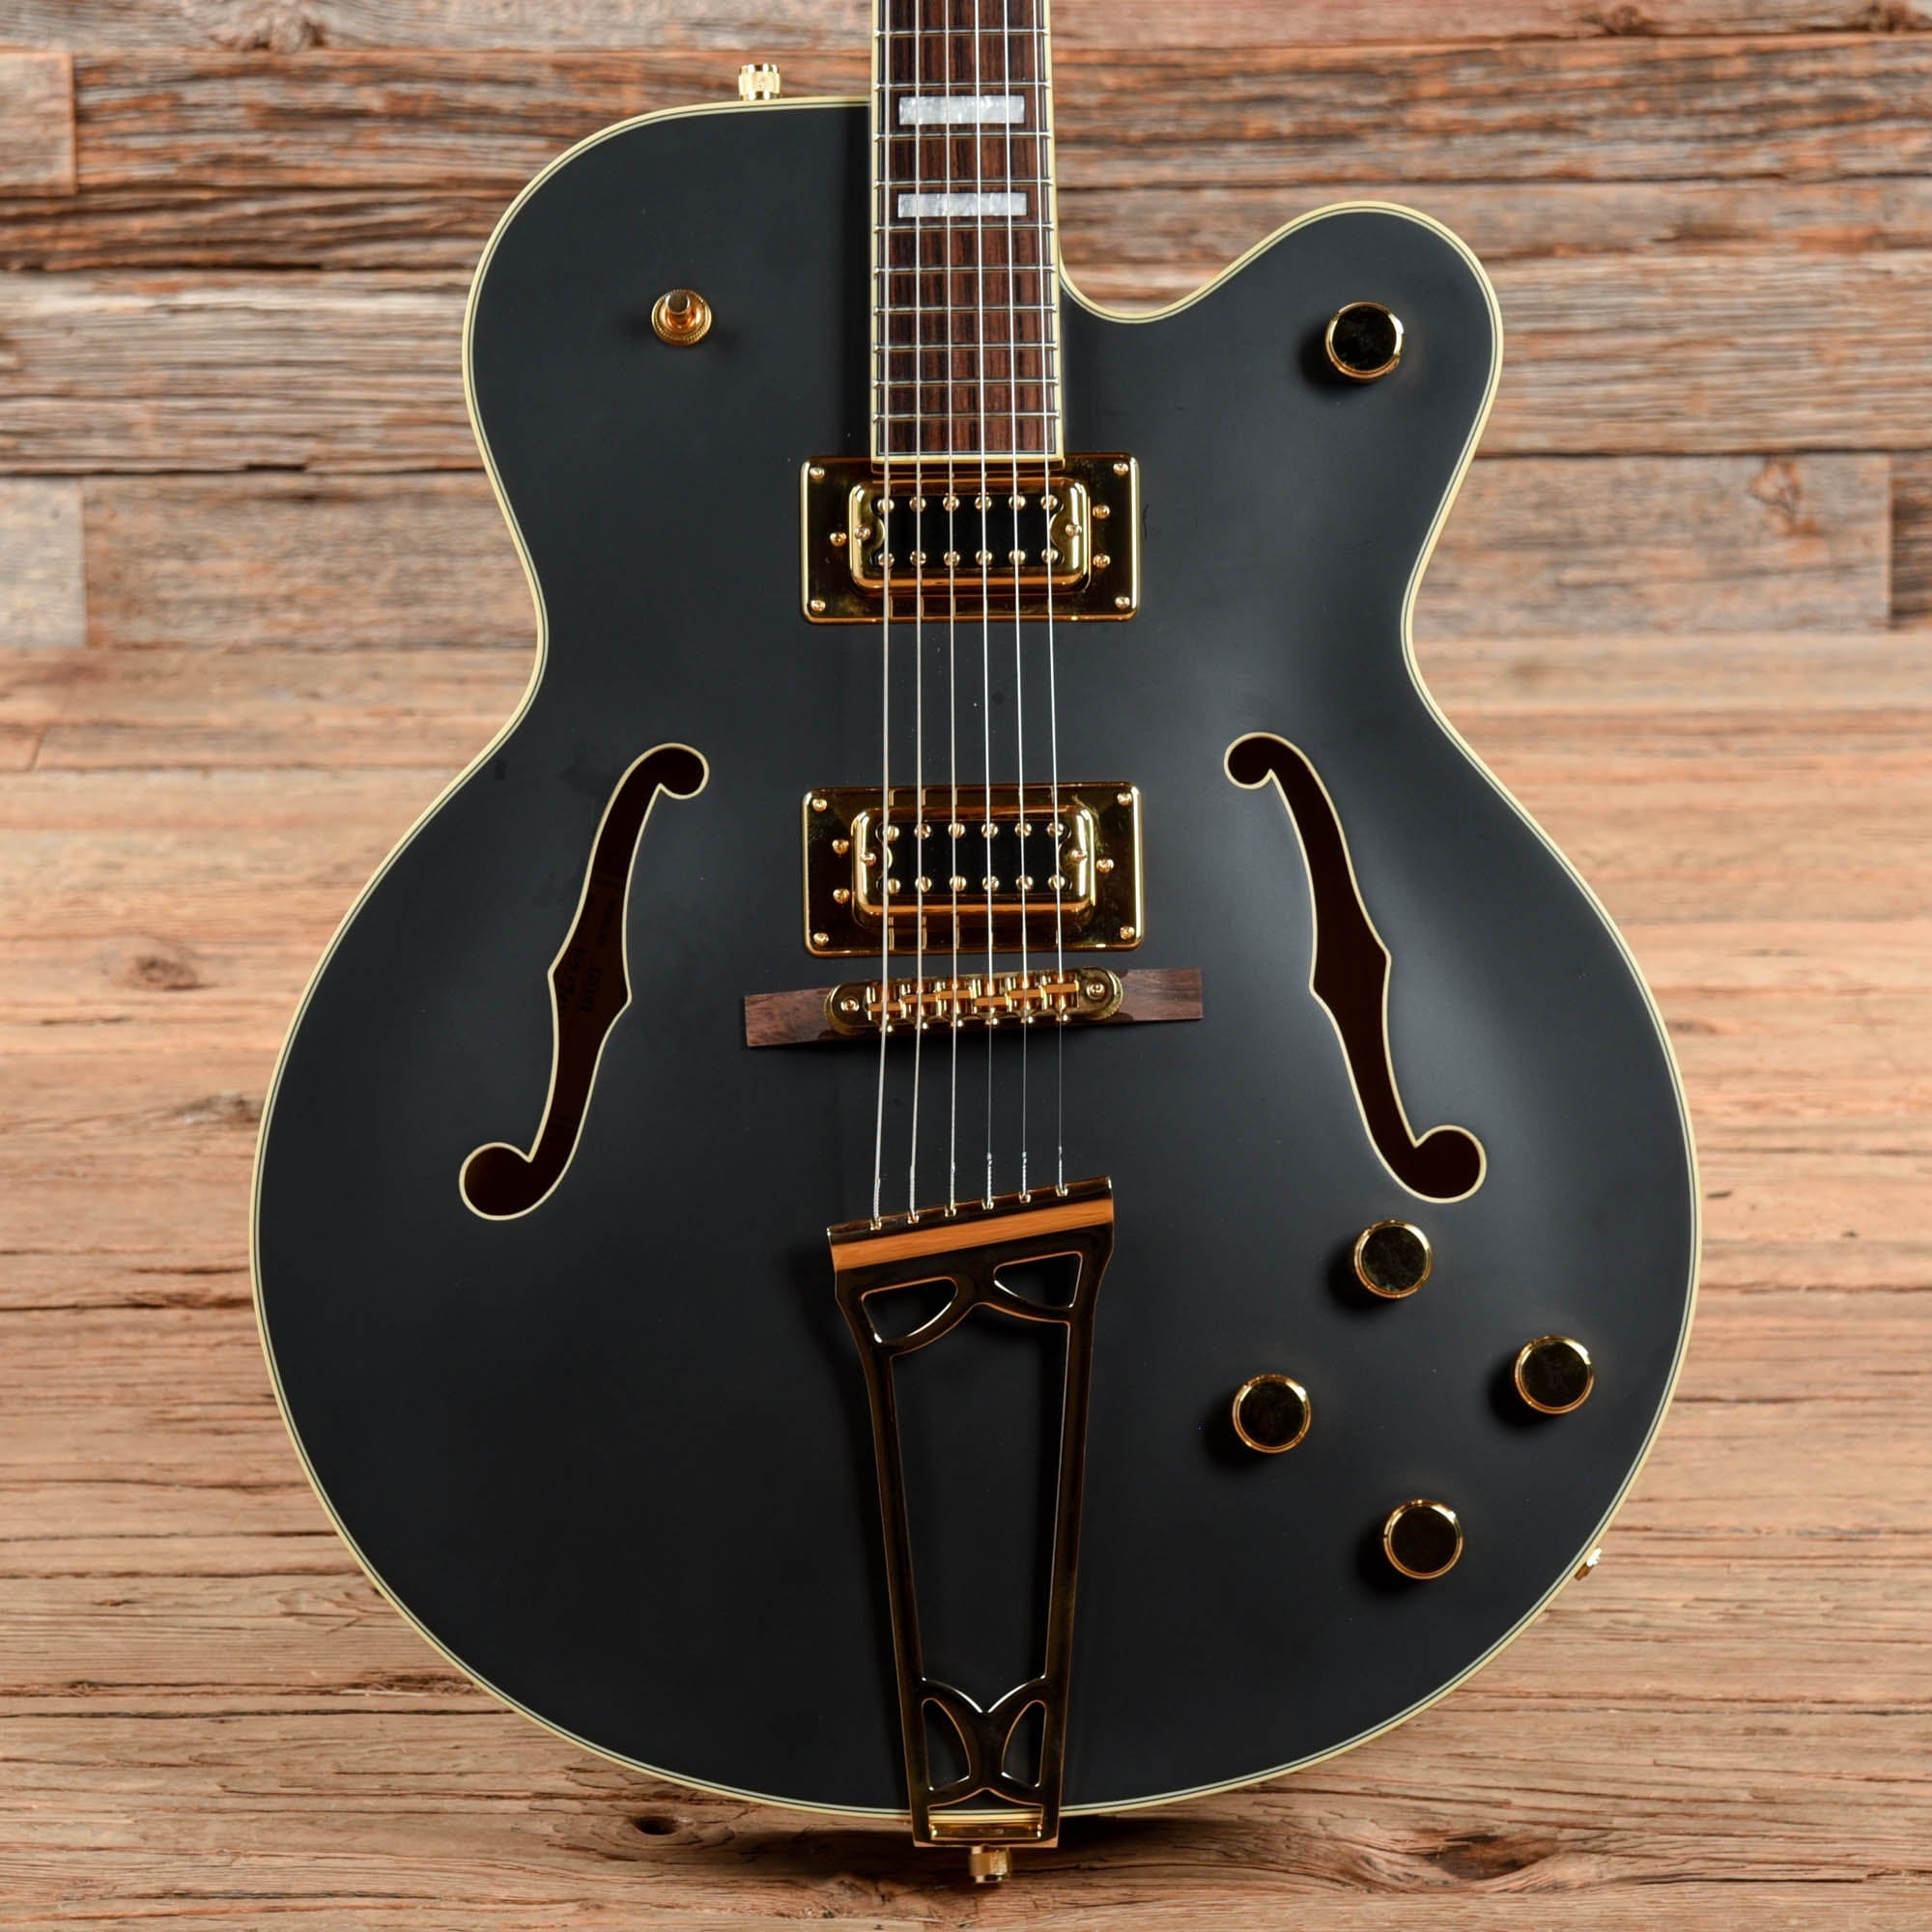 Elskede synet tidevand Gretsch G5191 Tim Armstrong Signature Electromatic Hollow Body Black 2 –  Chicago Music Exchange